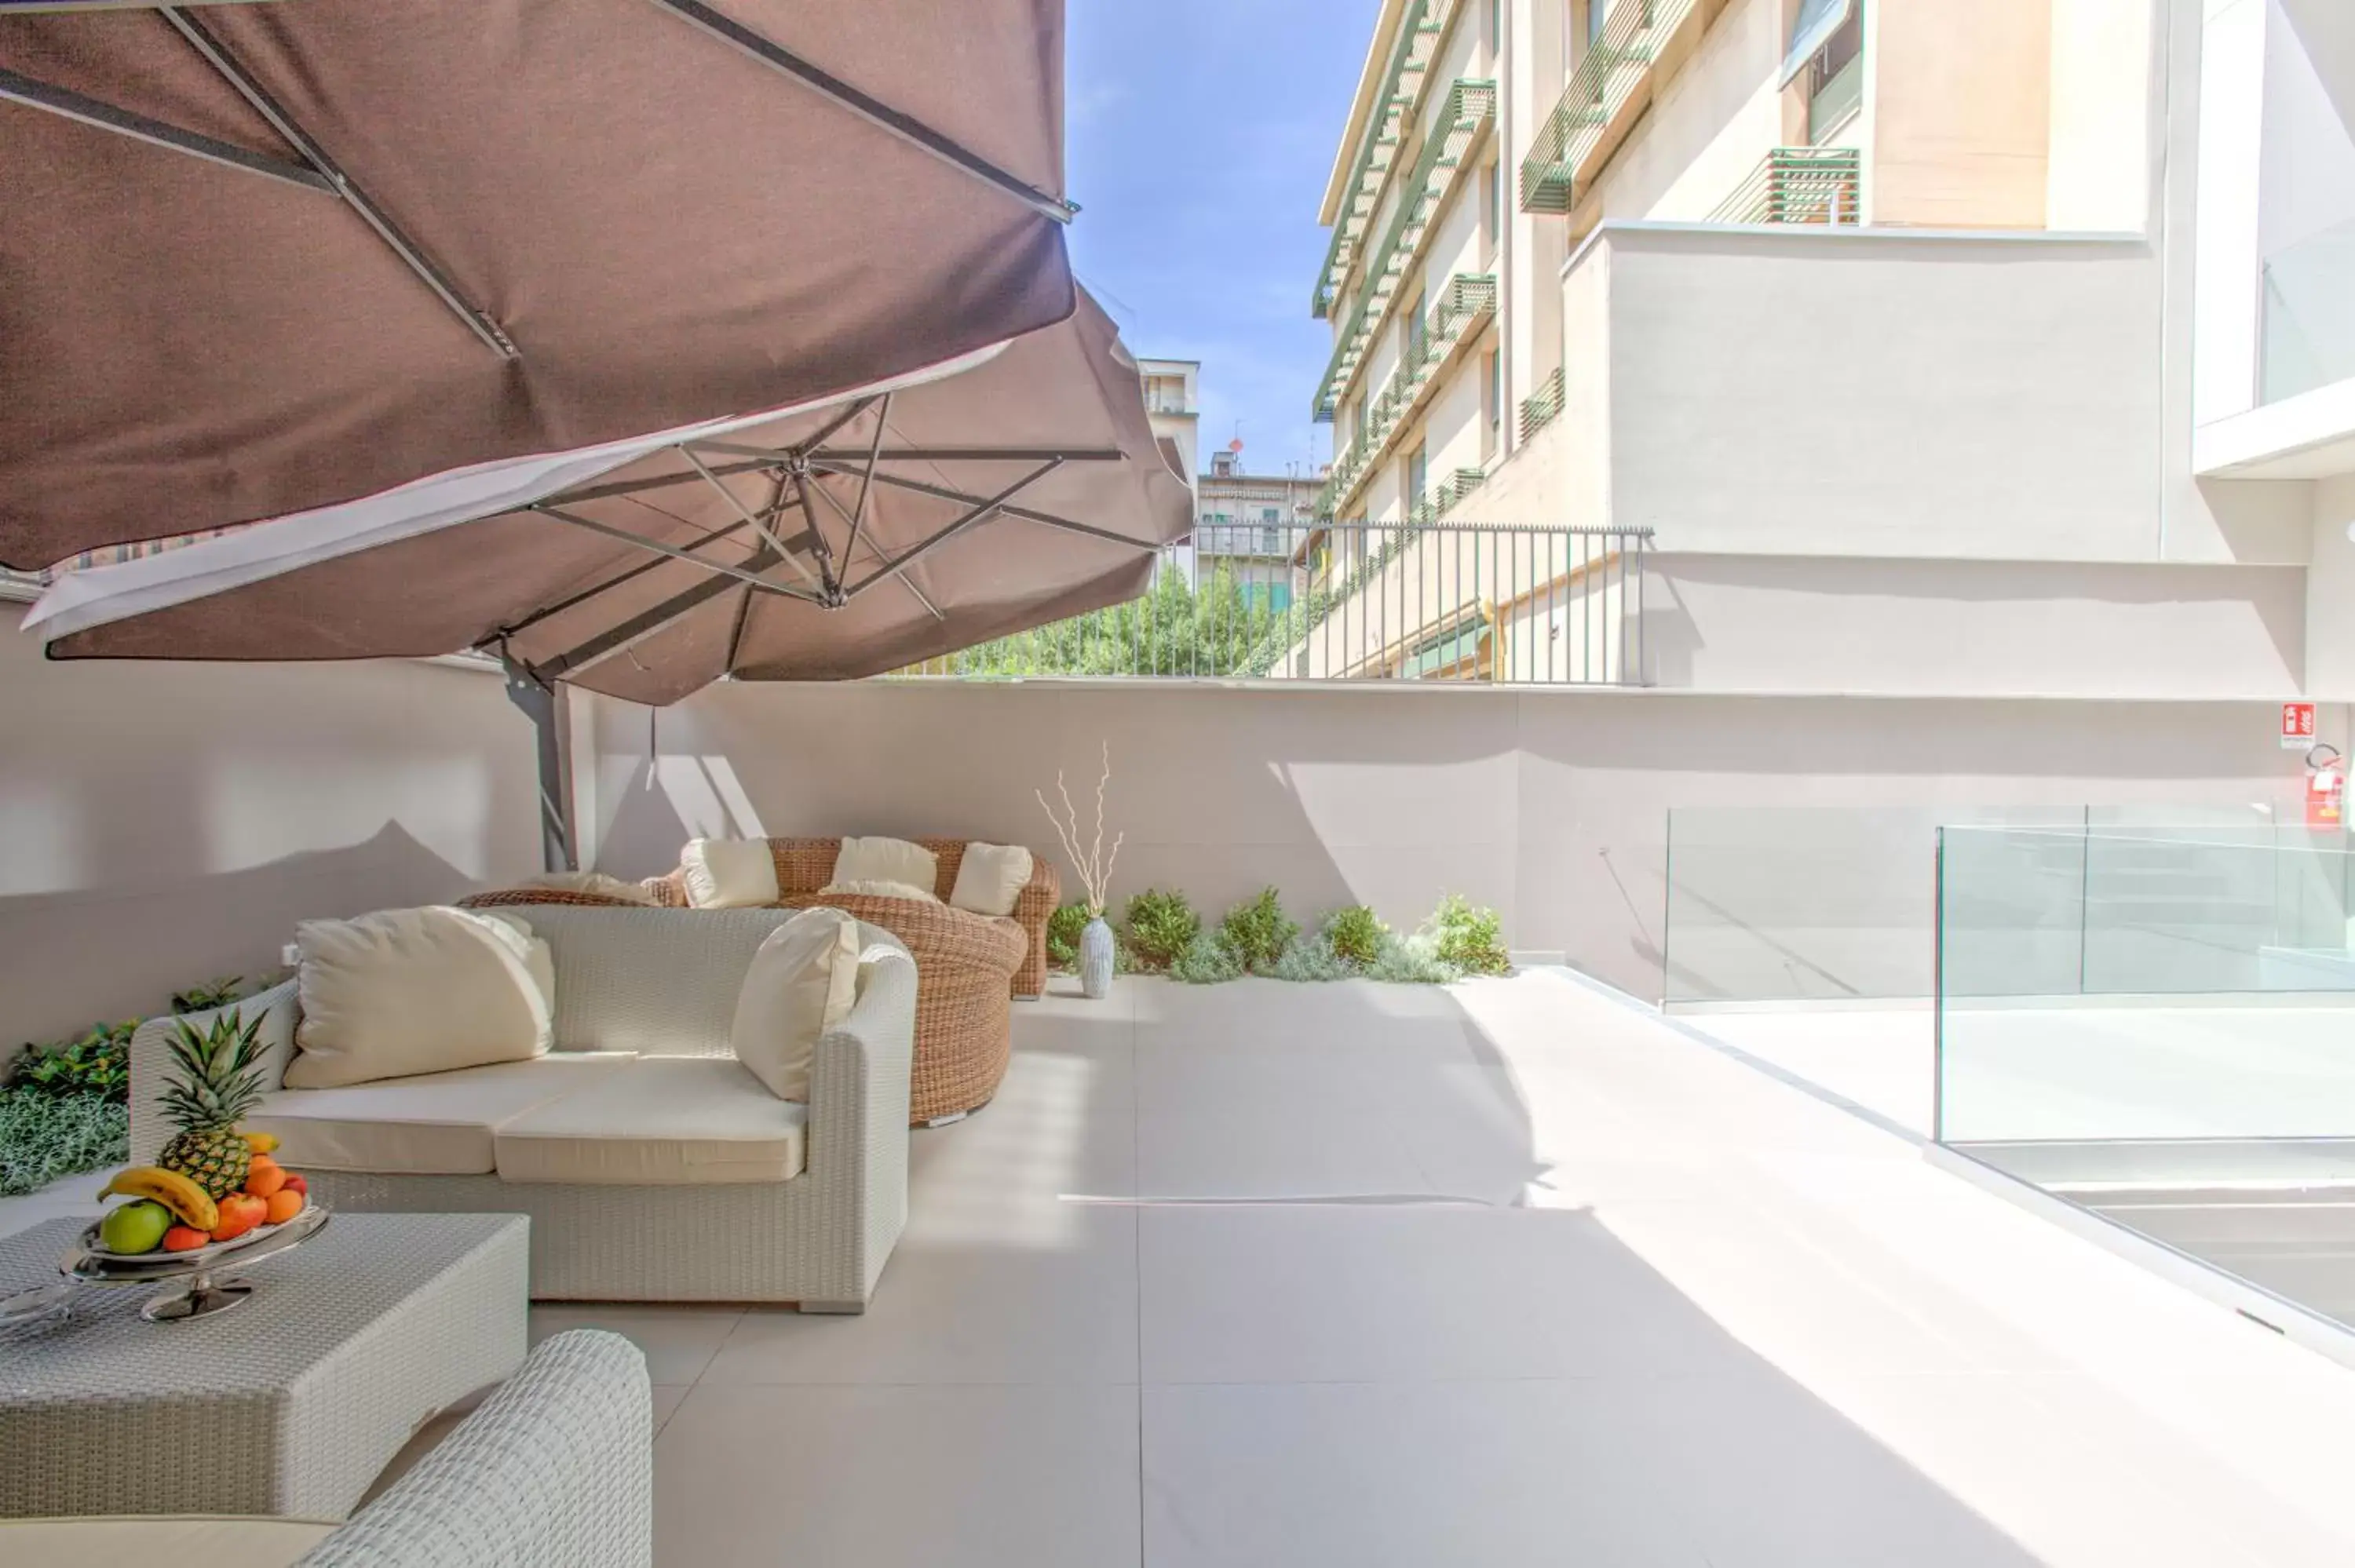 Balcony/Terrace, Patio/Outdoor Area in Mh Florence Hotel & Spa